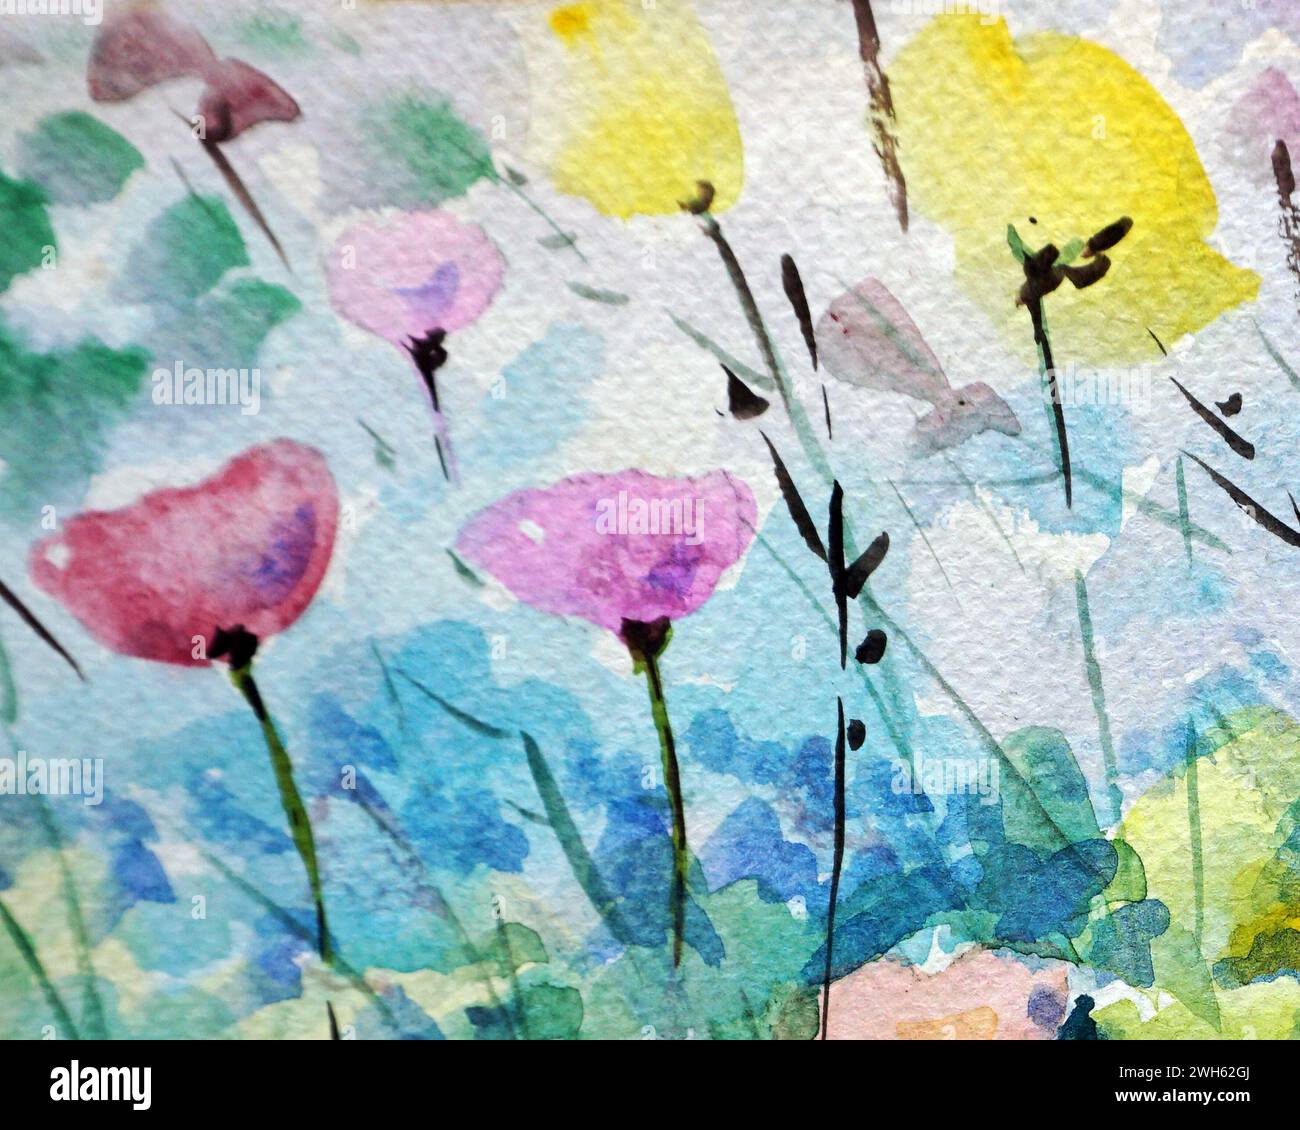 abstract color backgrounds for design Art watercolor painting flower Stock Photo